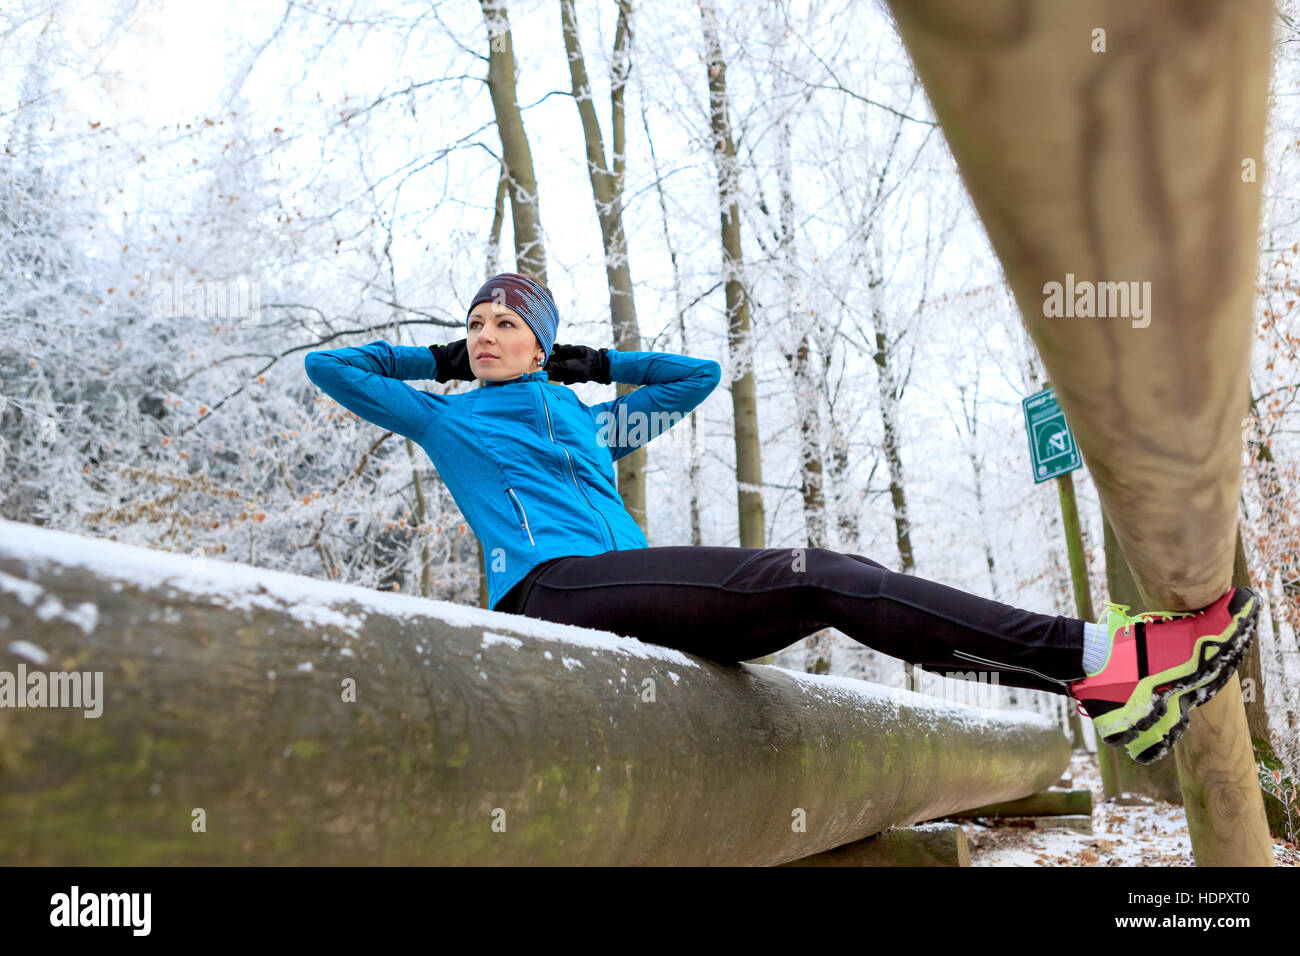 a young woman at physical activities on the Fitness Path in the wintry forest Stock Photo